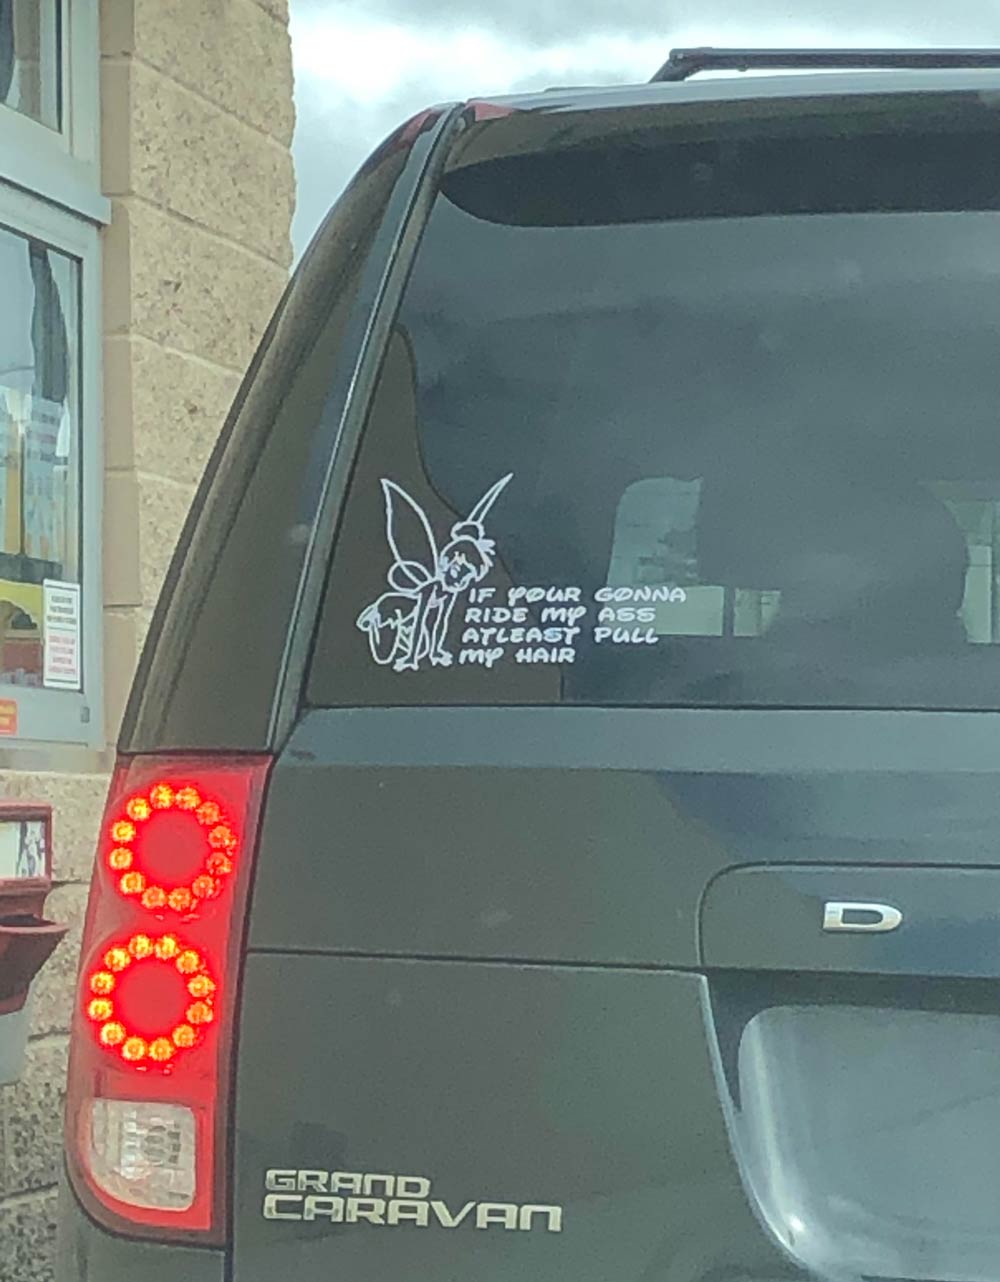 Spotted this classy sticker